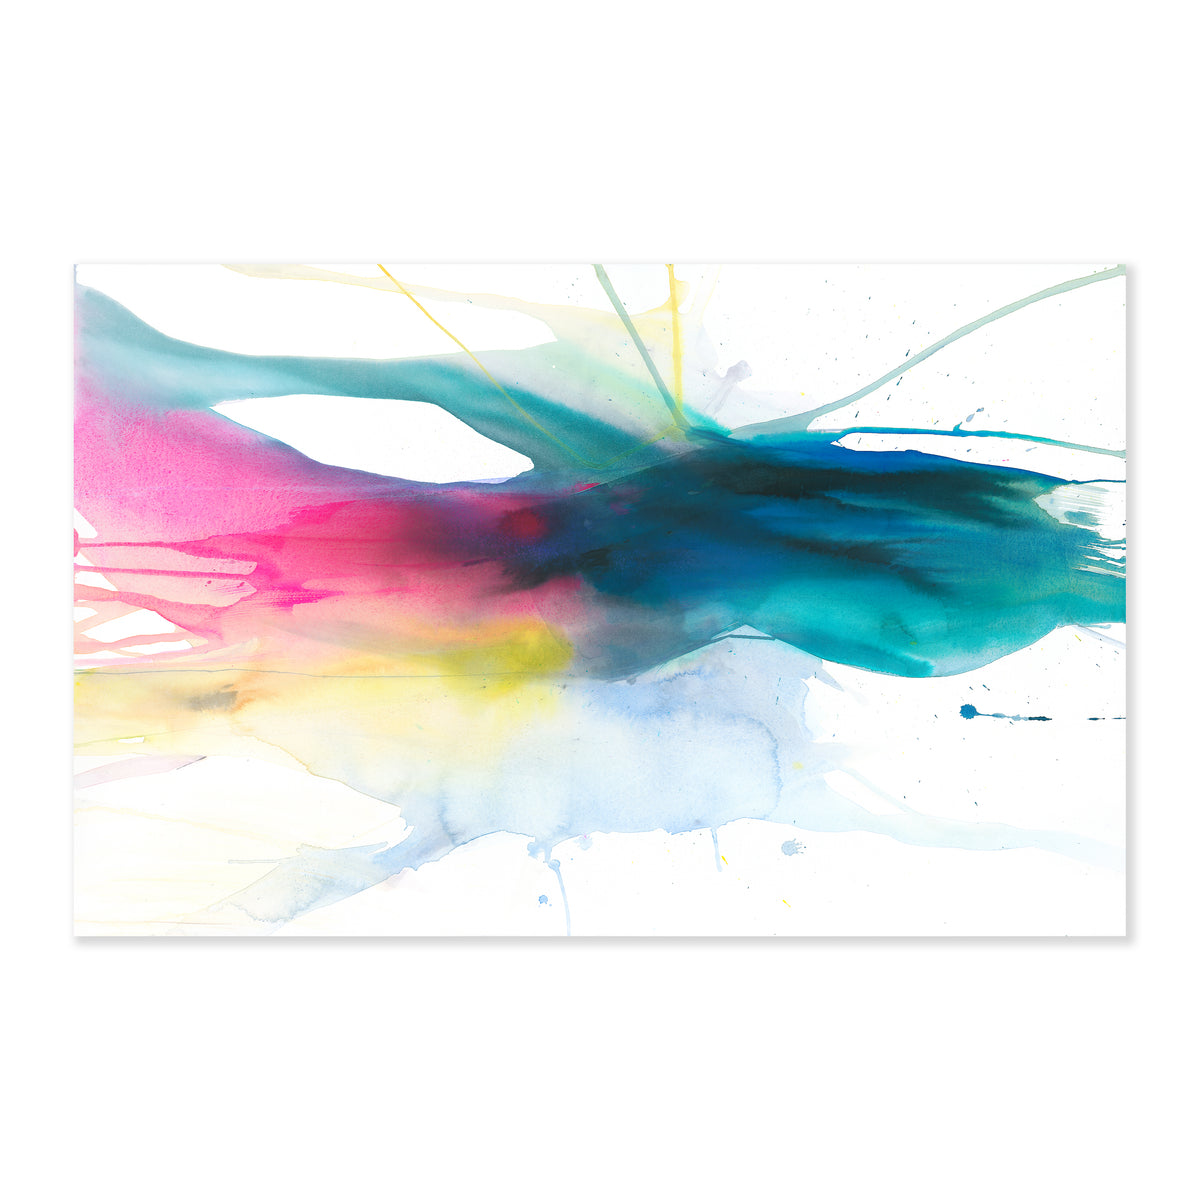 A fine art abstract painting featuring splashes on pink yellow blue and green watercolors on a soft white background